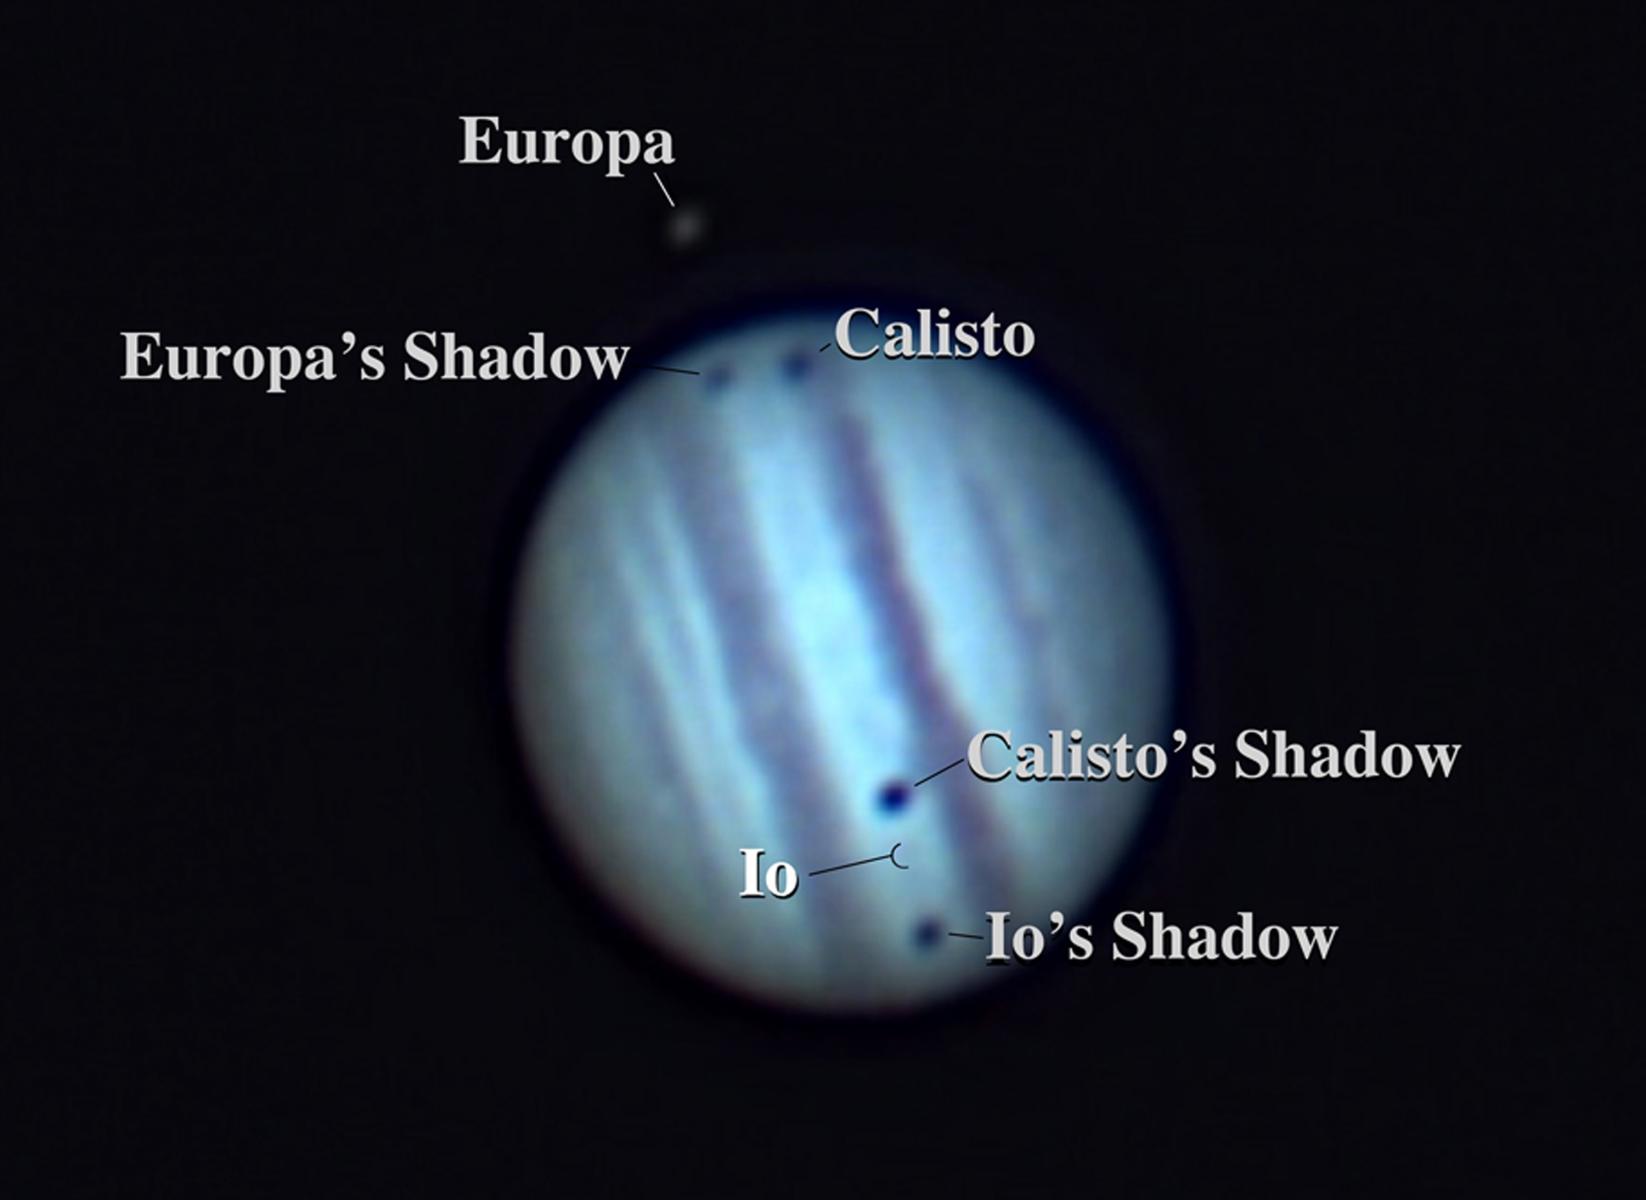 Europa, Calisto, and Io create shadows across the surface of Jupiter, as seen from Earth